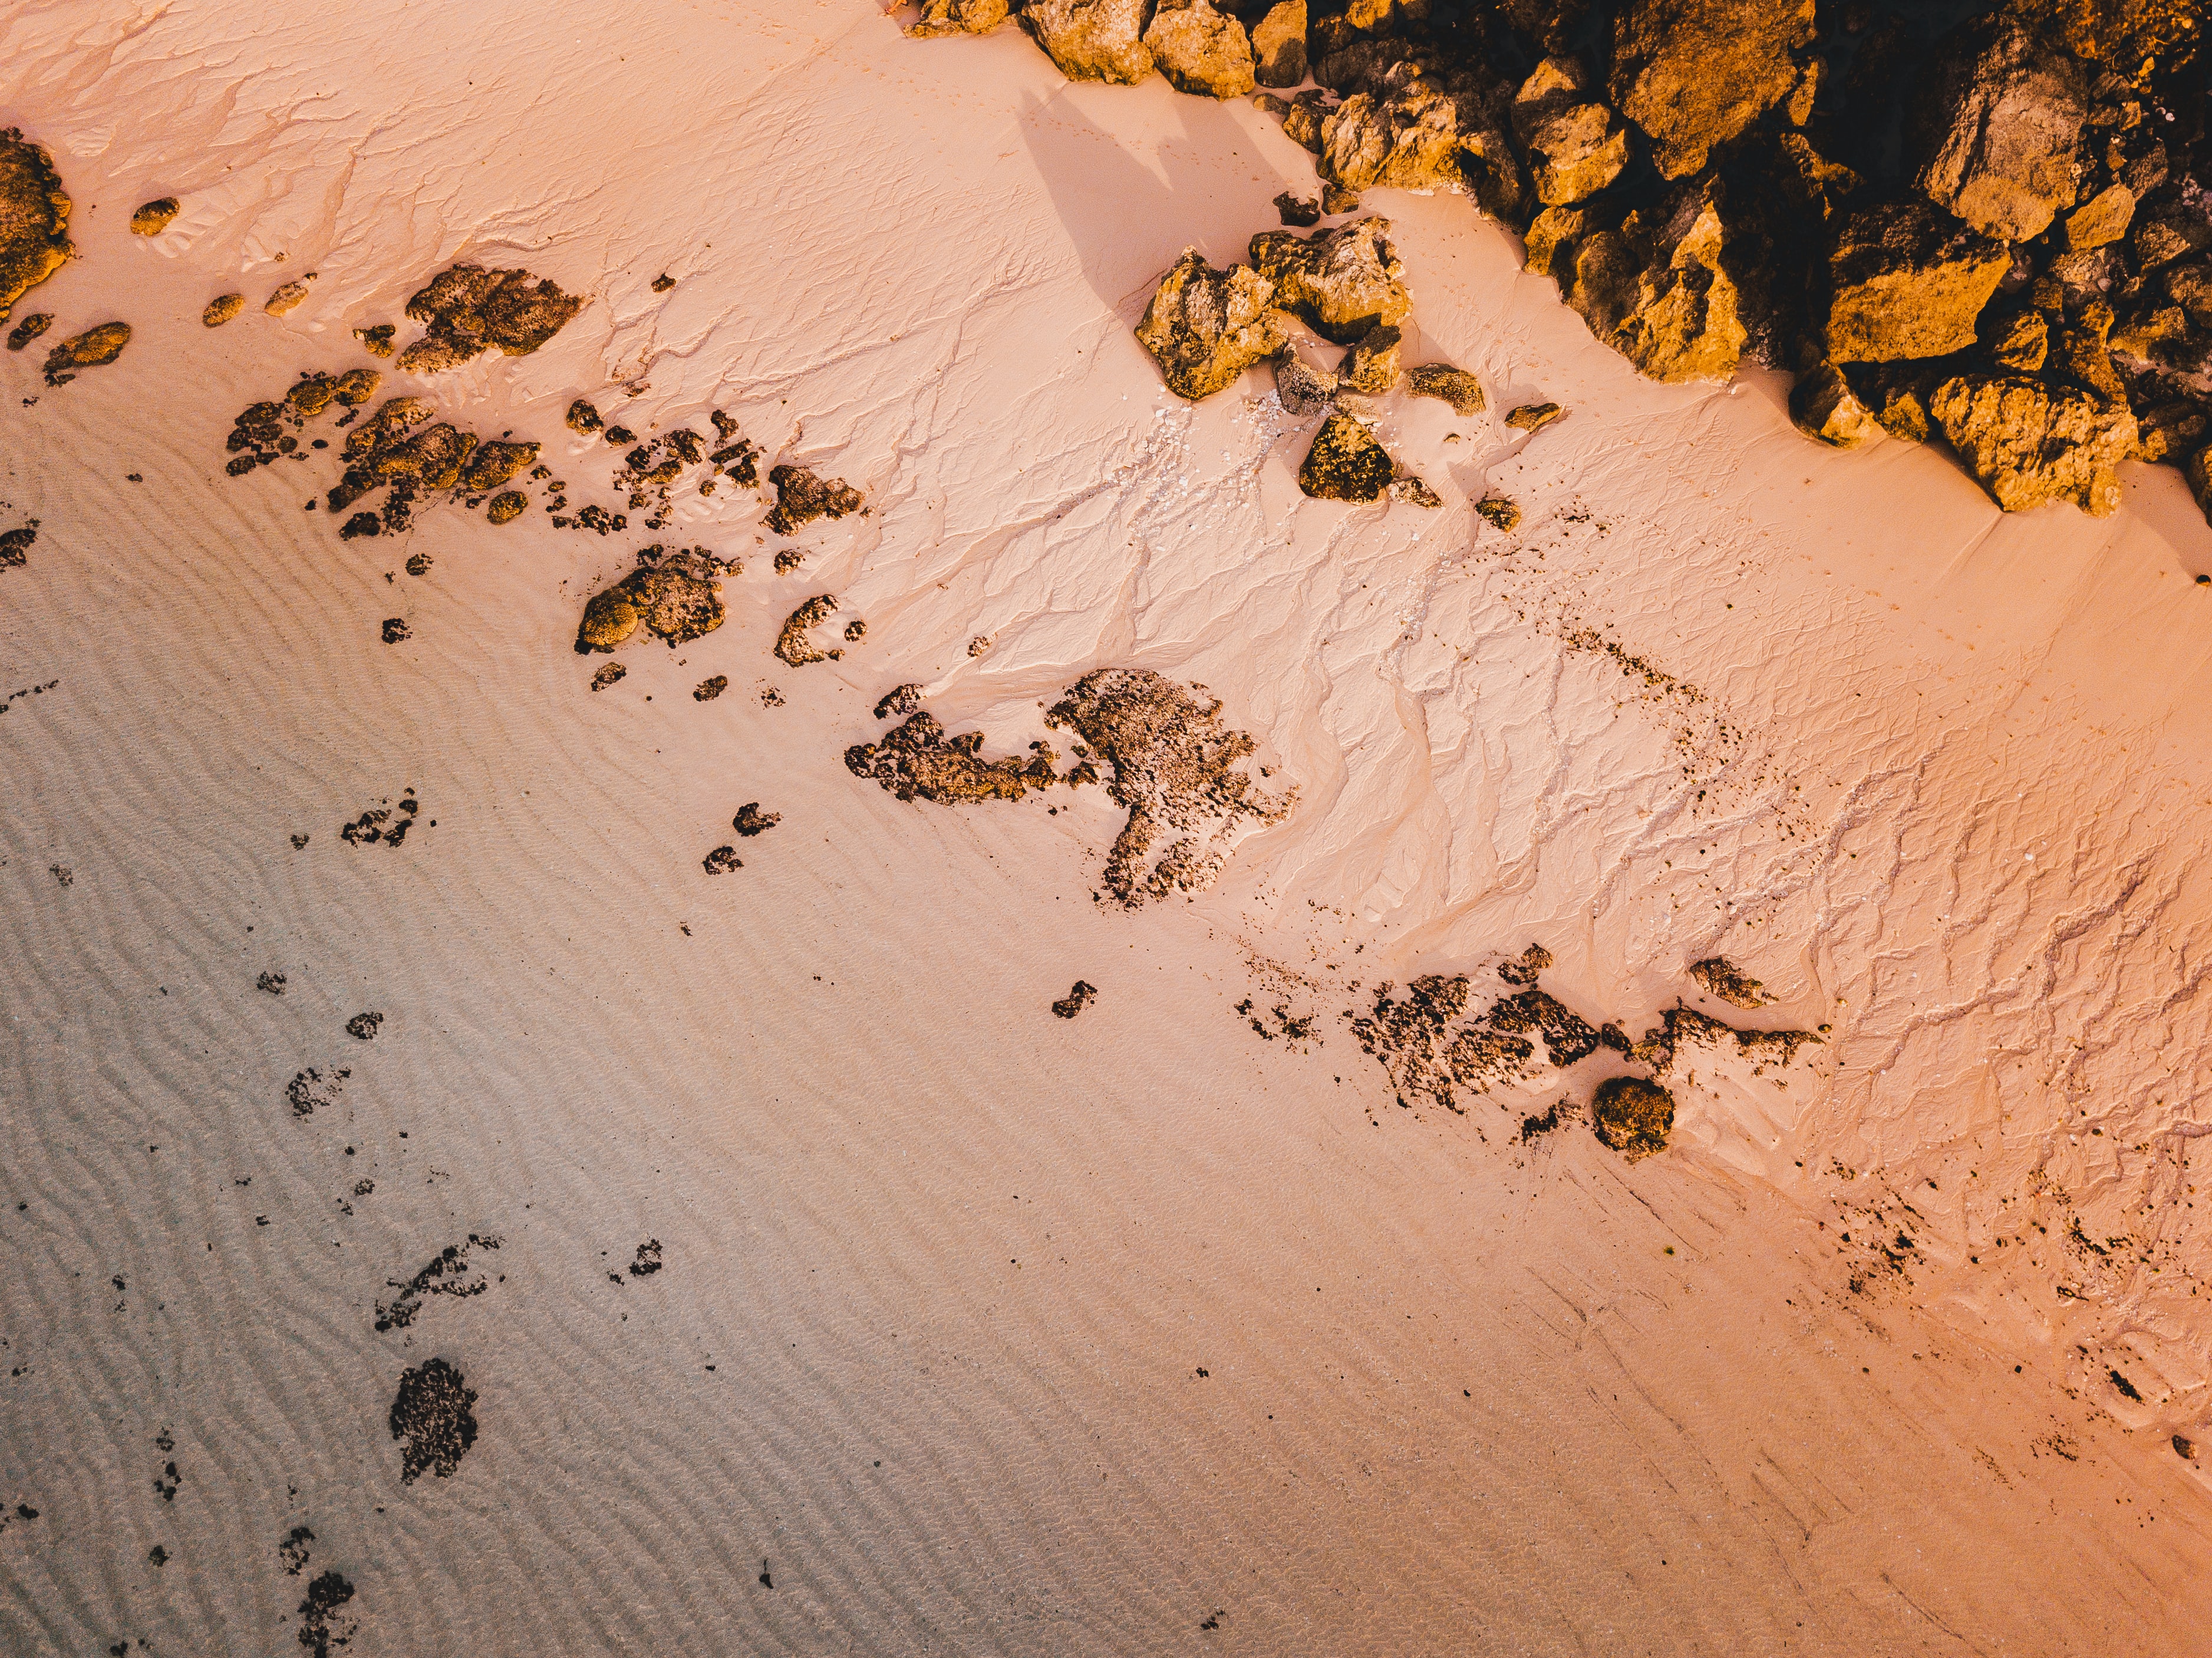 view from above, nature, beach, sand, rocks QHD